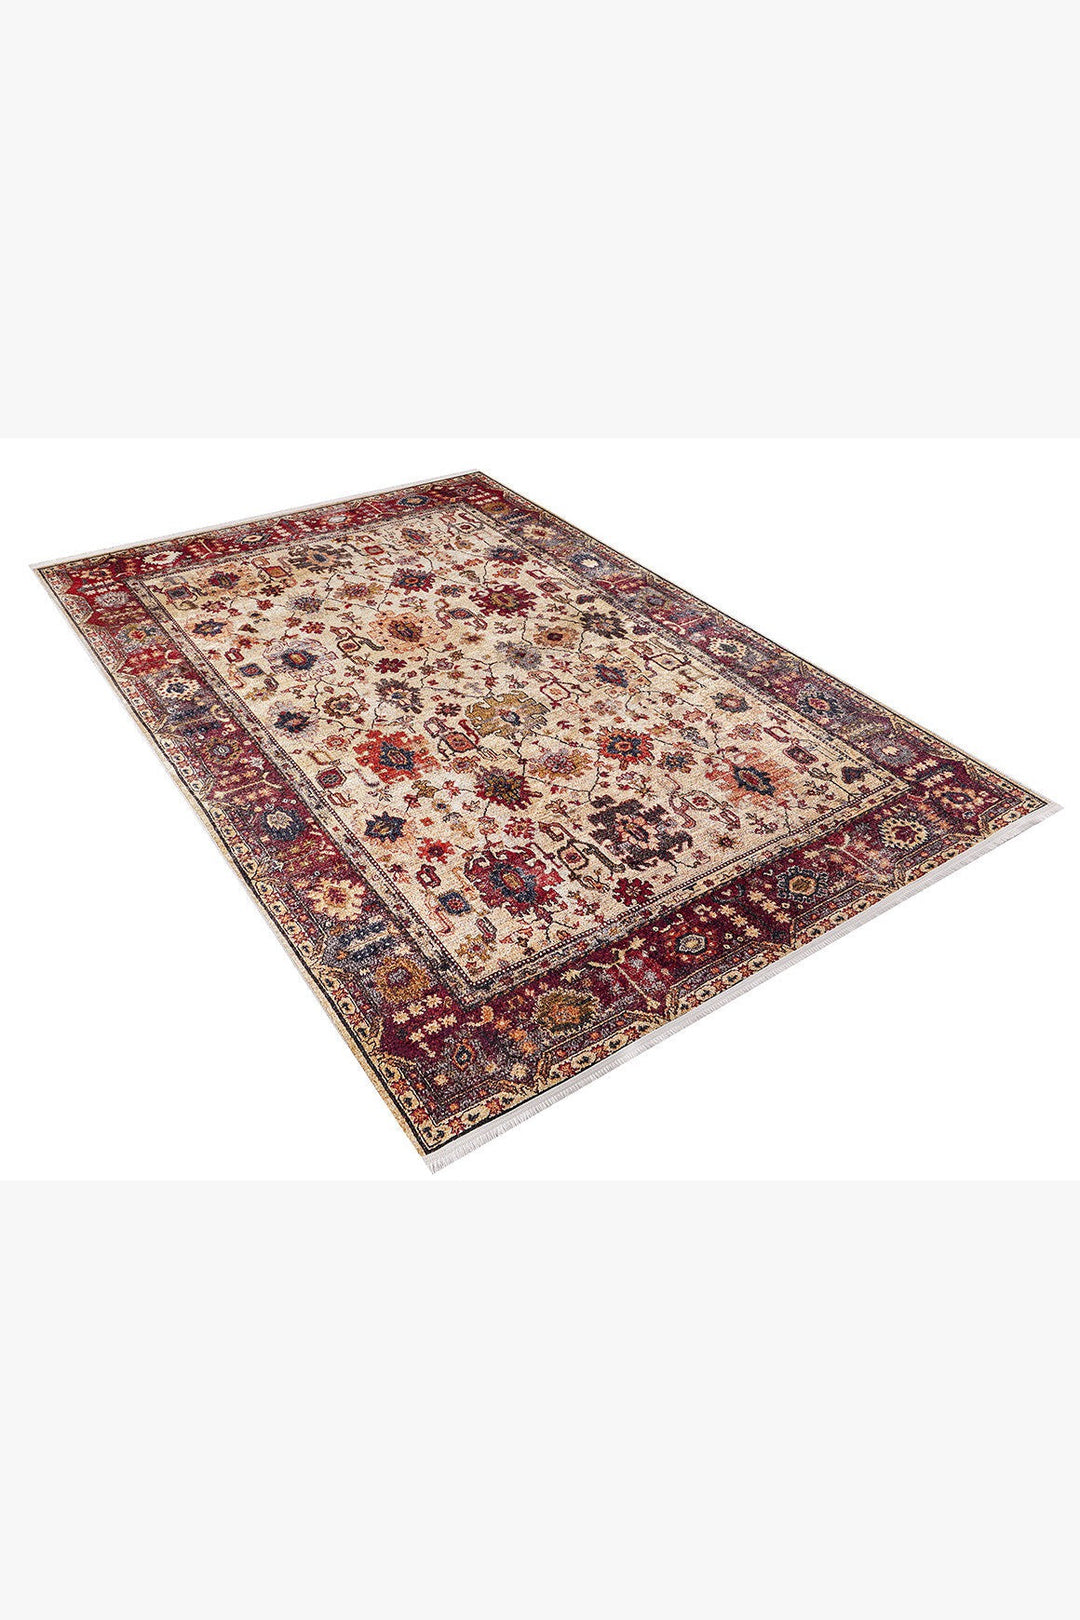 machine-washable-area-rug-Traditional-Collection-Bronze-Brown-Red-JR899